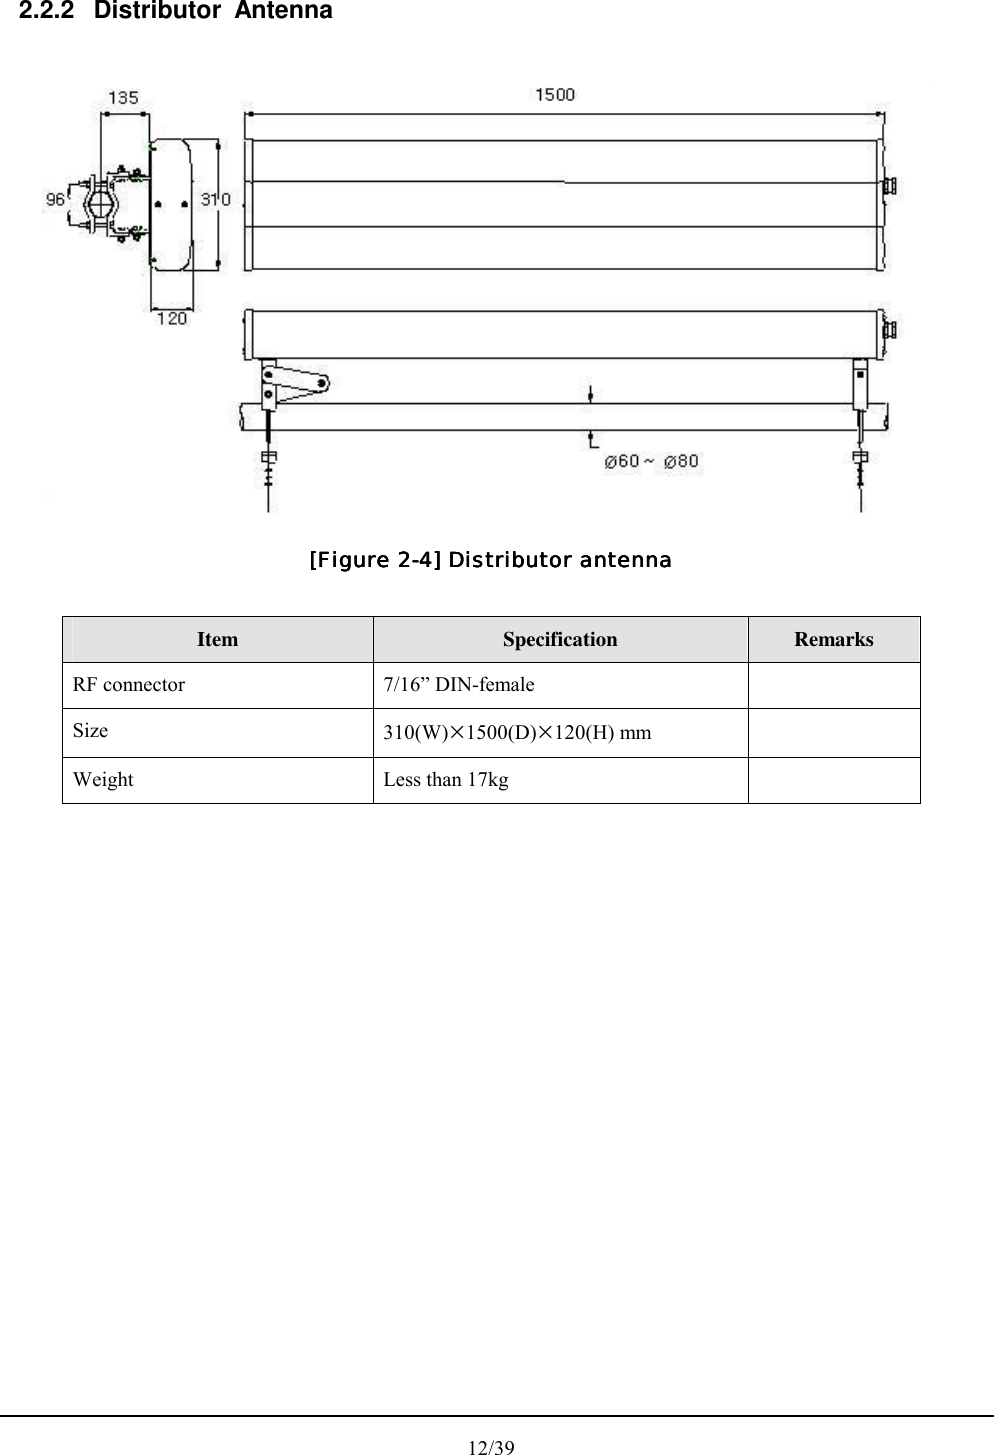  12/39 2.2.2 Distributor Antenna      [Figure 2[Figure 2[Figure 2[Figure 2----4] Distributor antenna4] Distributor antenna4] Distributor antenna4] Distributor antenna     Item  Specification  Remarks RF connector  7/16” DIN-female   Size  310(W)1500(D)120(H) mm   Weight  Less than 17kg     